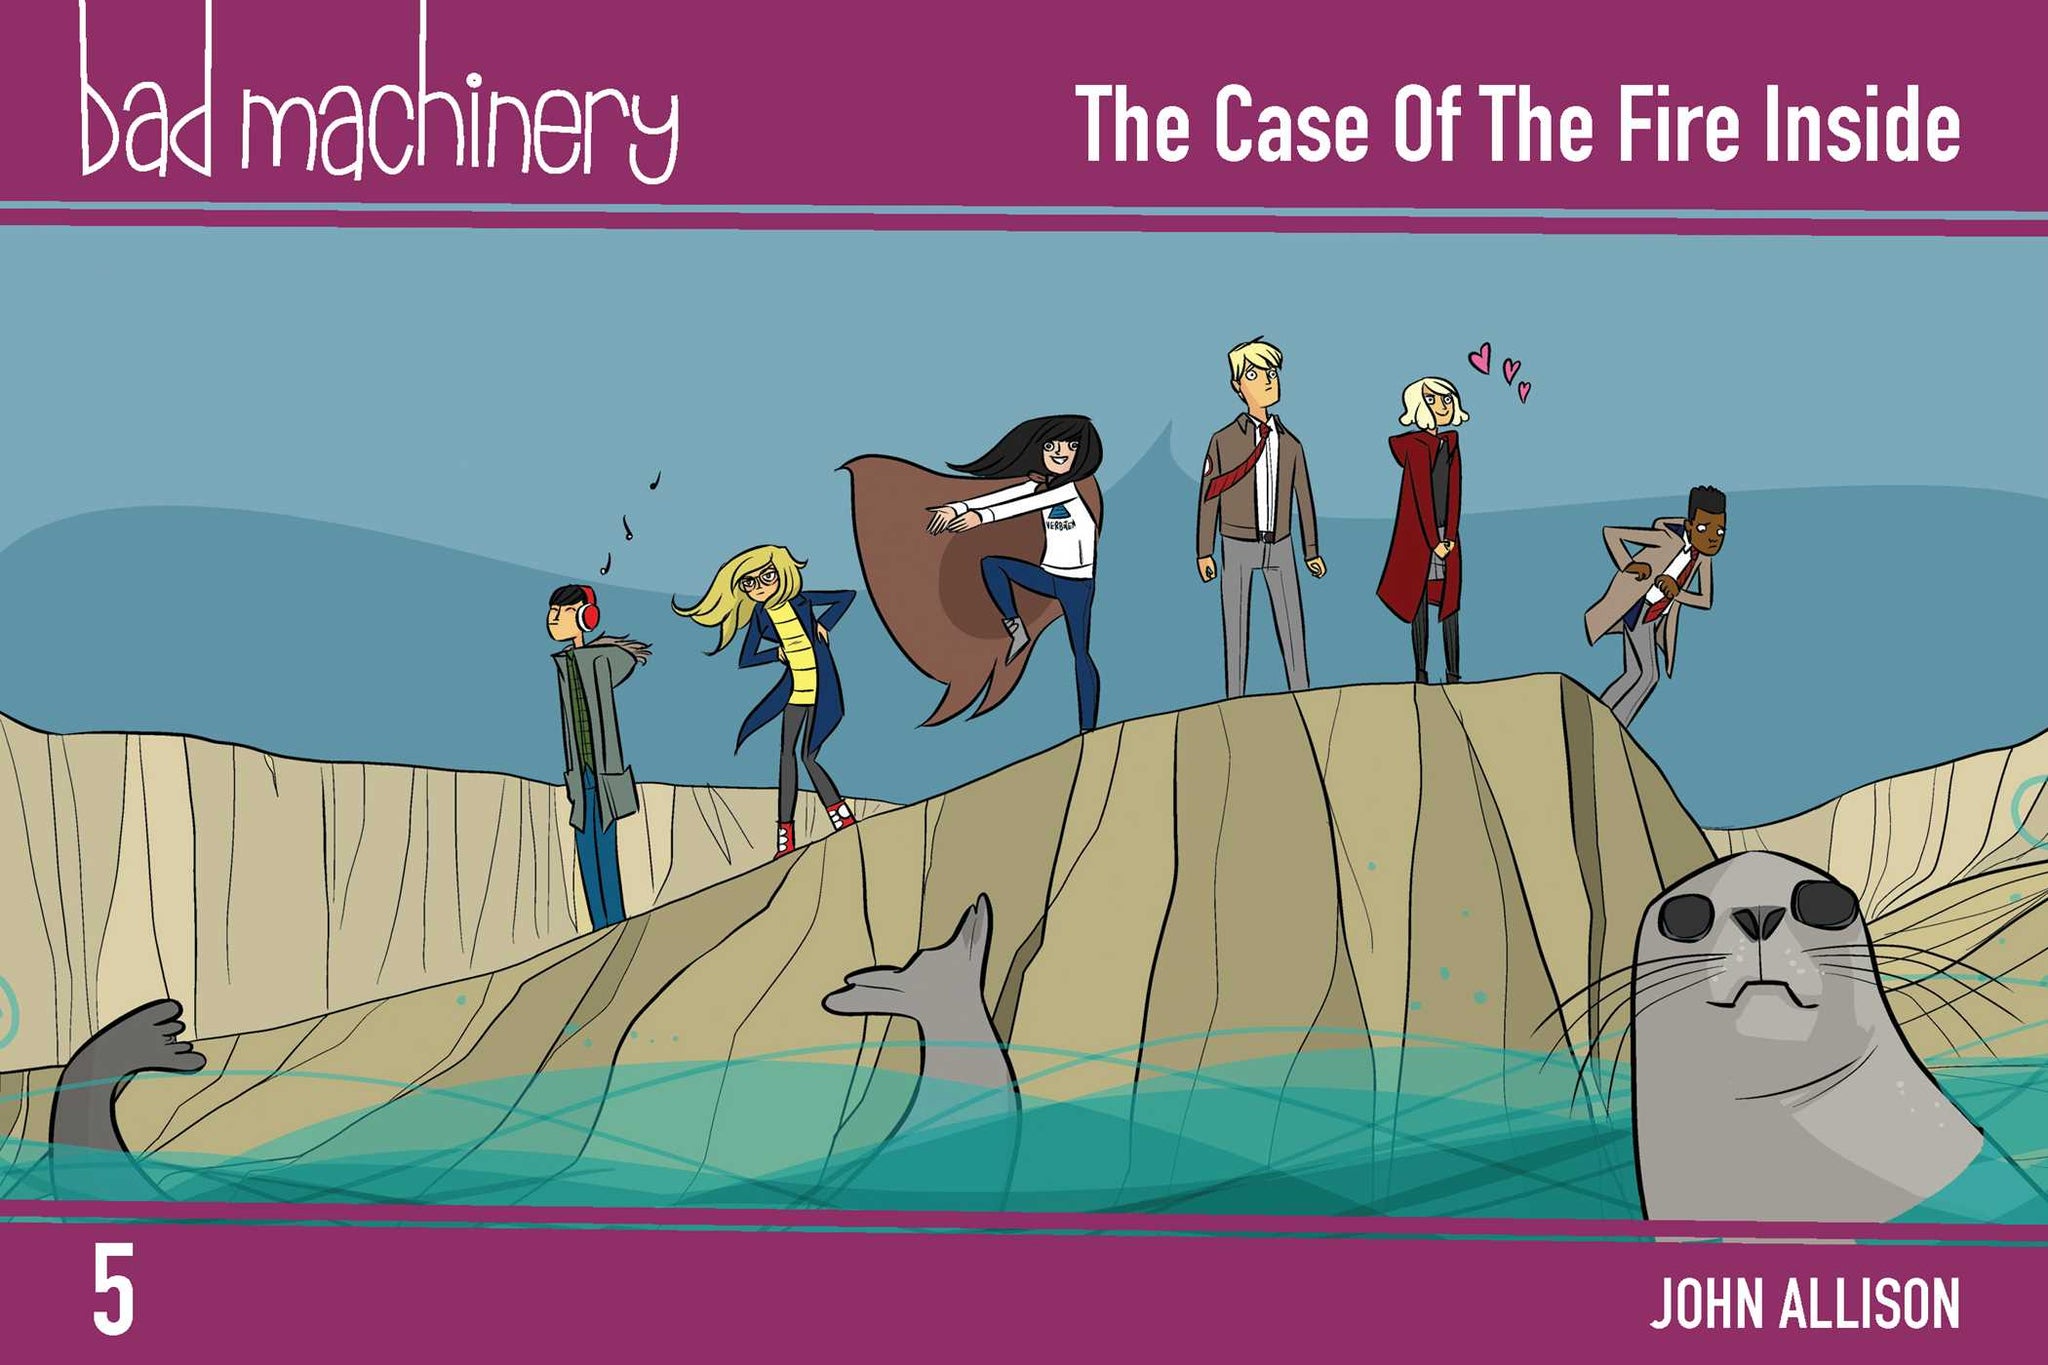 Bad Machinery Vol. 5 : The Case of the Fire Inside, Pocket Edition